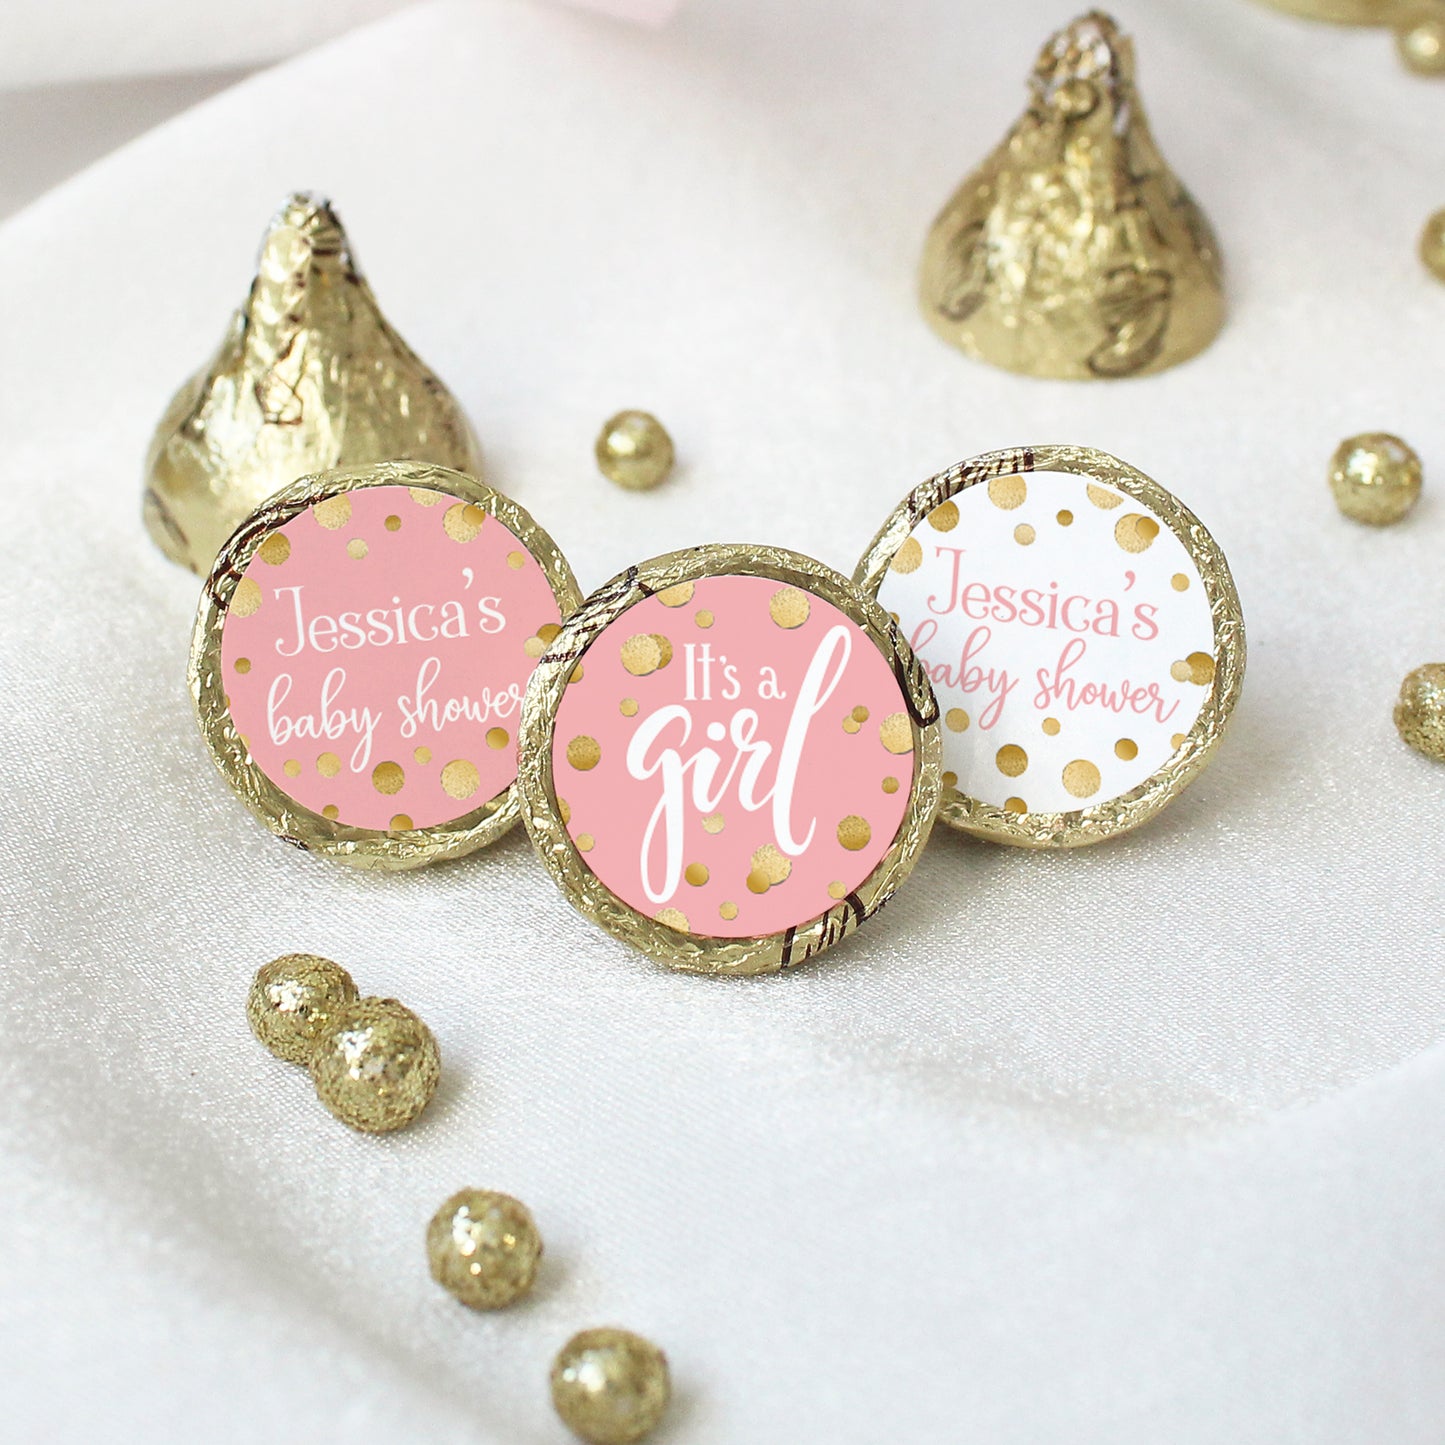 Personalized Gold Confetti: Pink - It's a Girl Baby Shower Favor Stickers - Fits on Hershey's Kisses - 180 Stickers